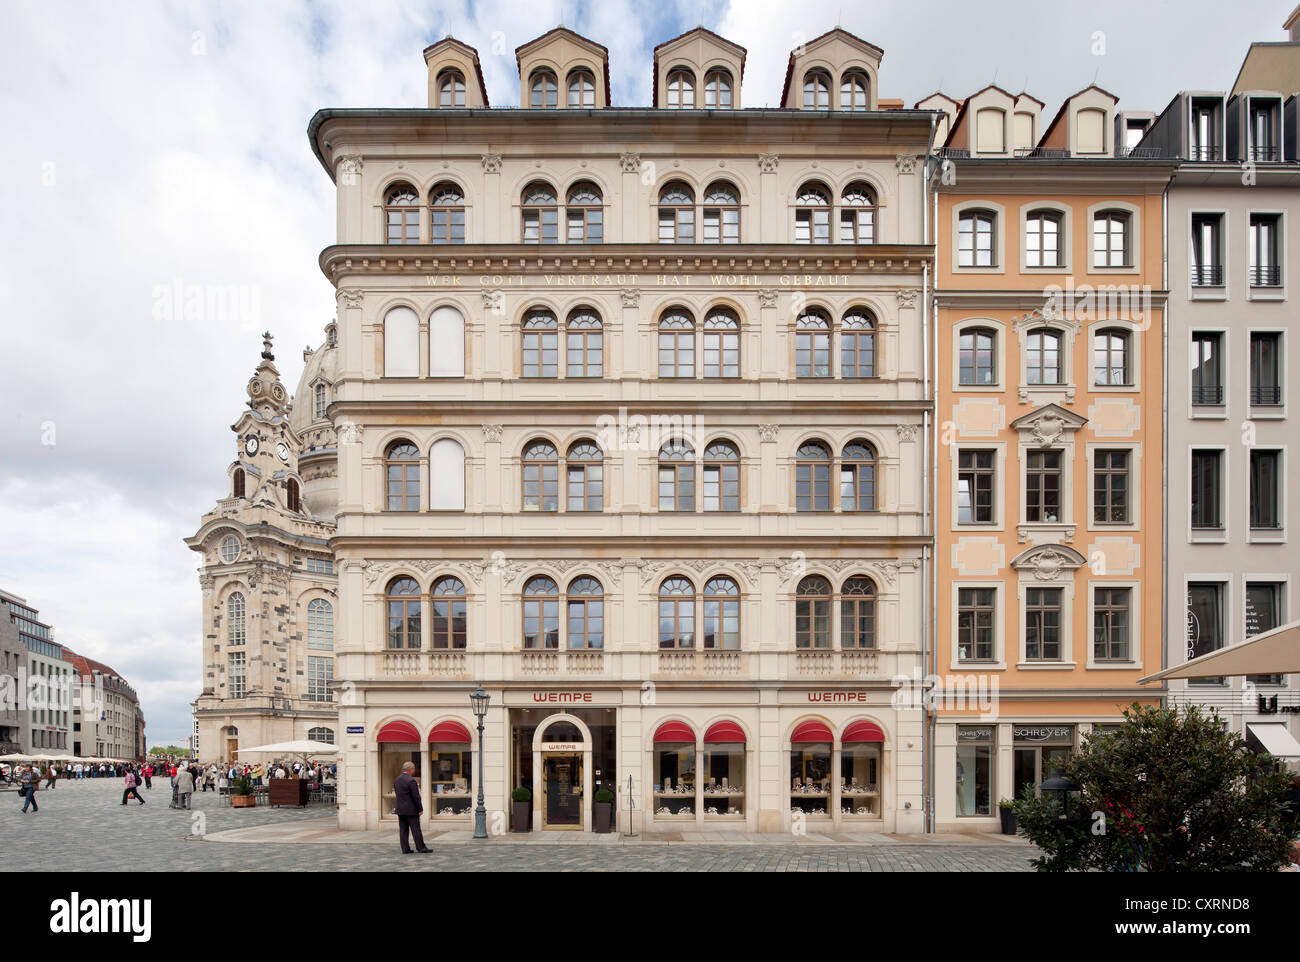 Quartier 3 at Neumarkt square, office building, commercial building, Old Town, Dresden, Saxony, Germany, Europe, PublicGround Stock Photo